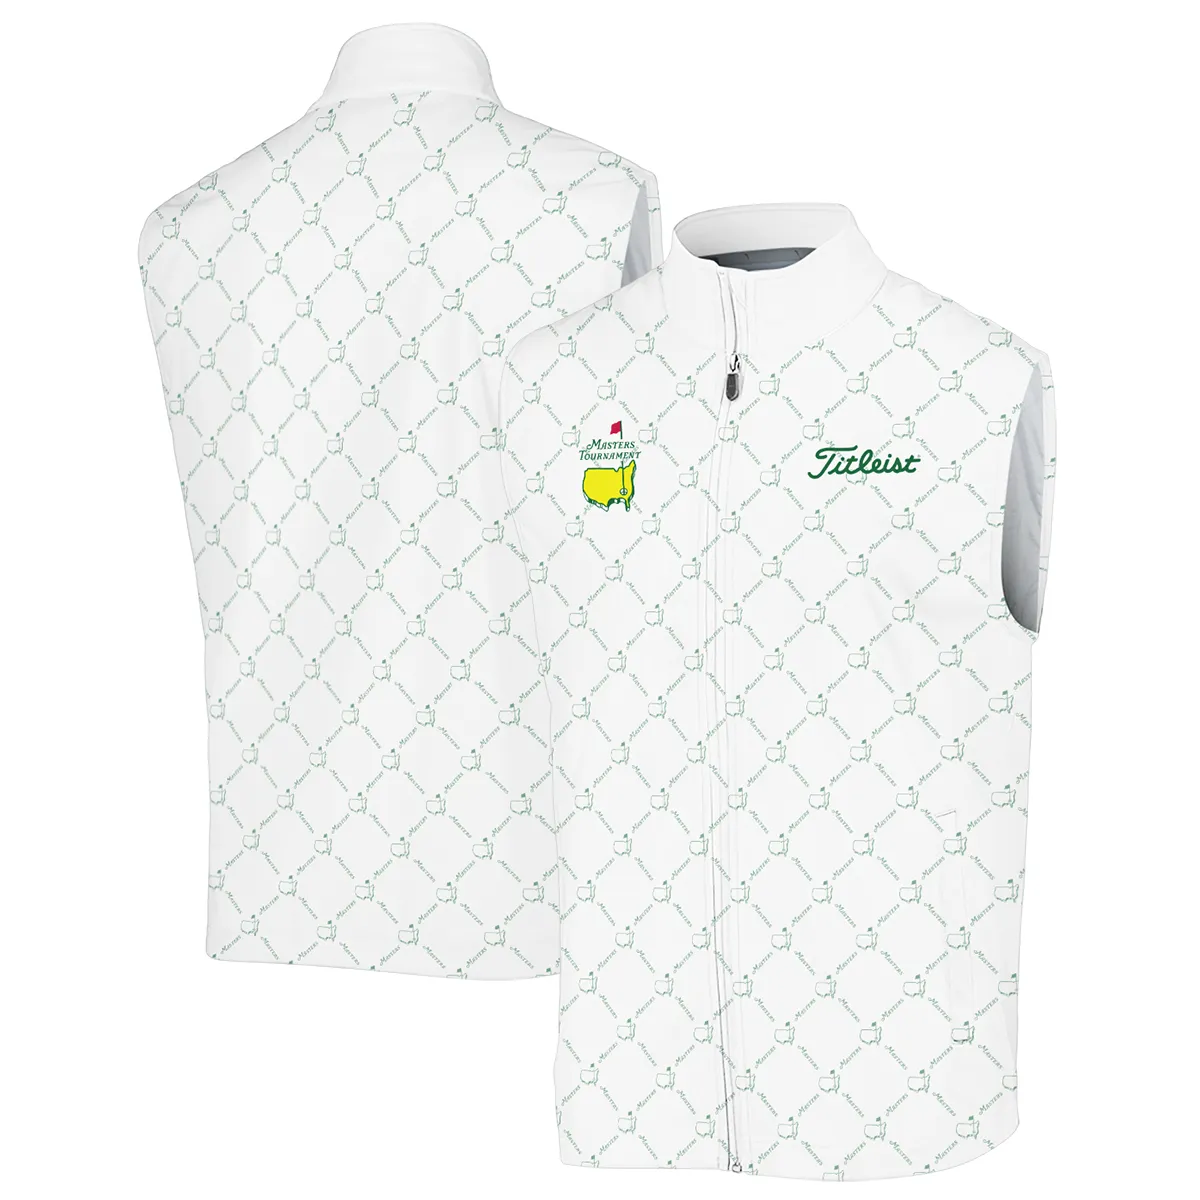 Golf Sport Pattern Color White Mix Masters Tournament Titleist Vneck Polo Shirt Style Classic